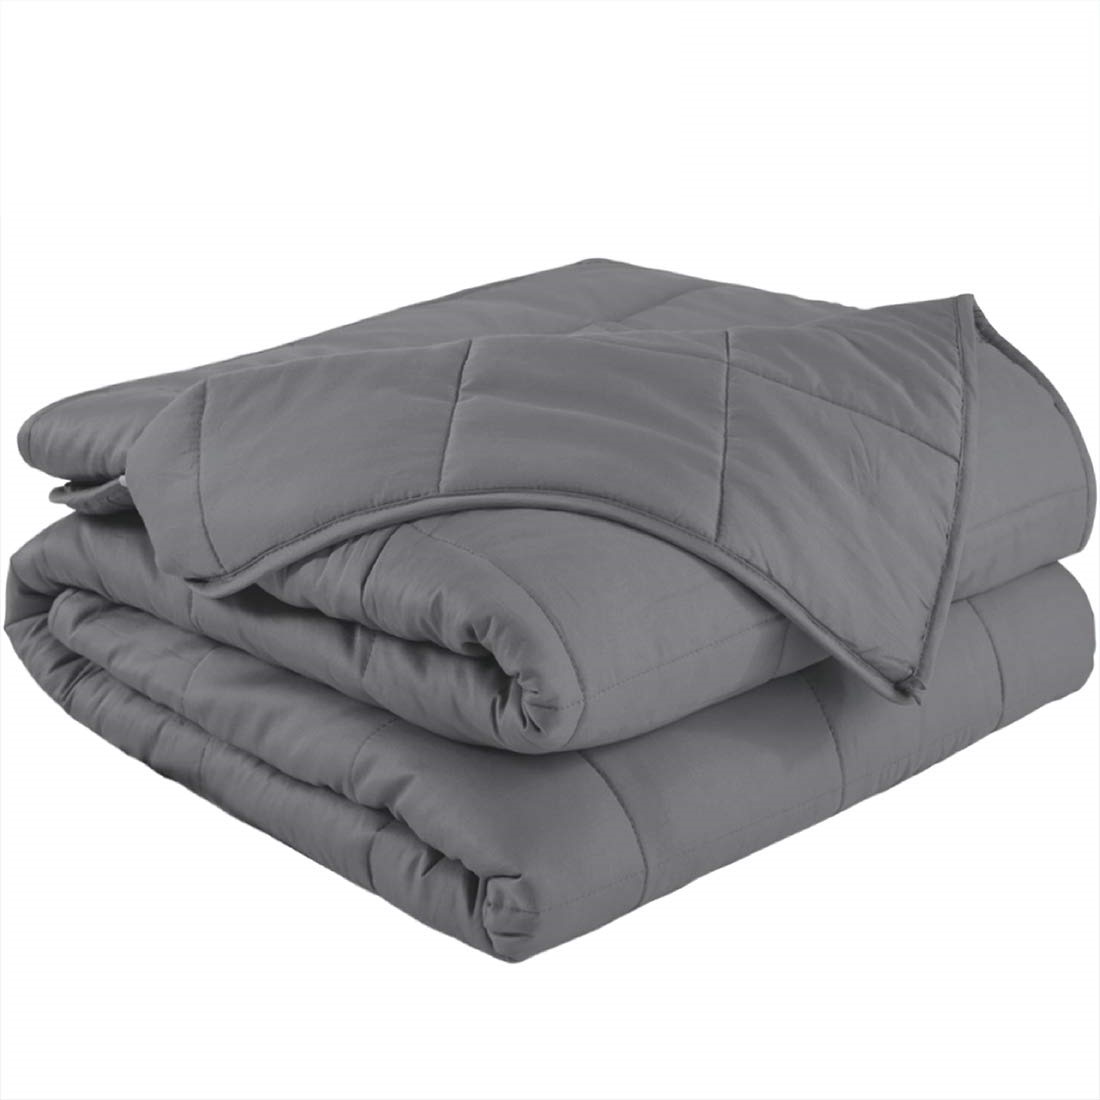 COHOME Weighted Blanket